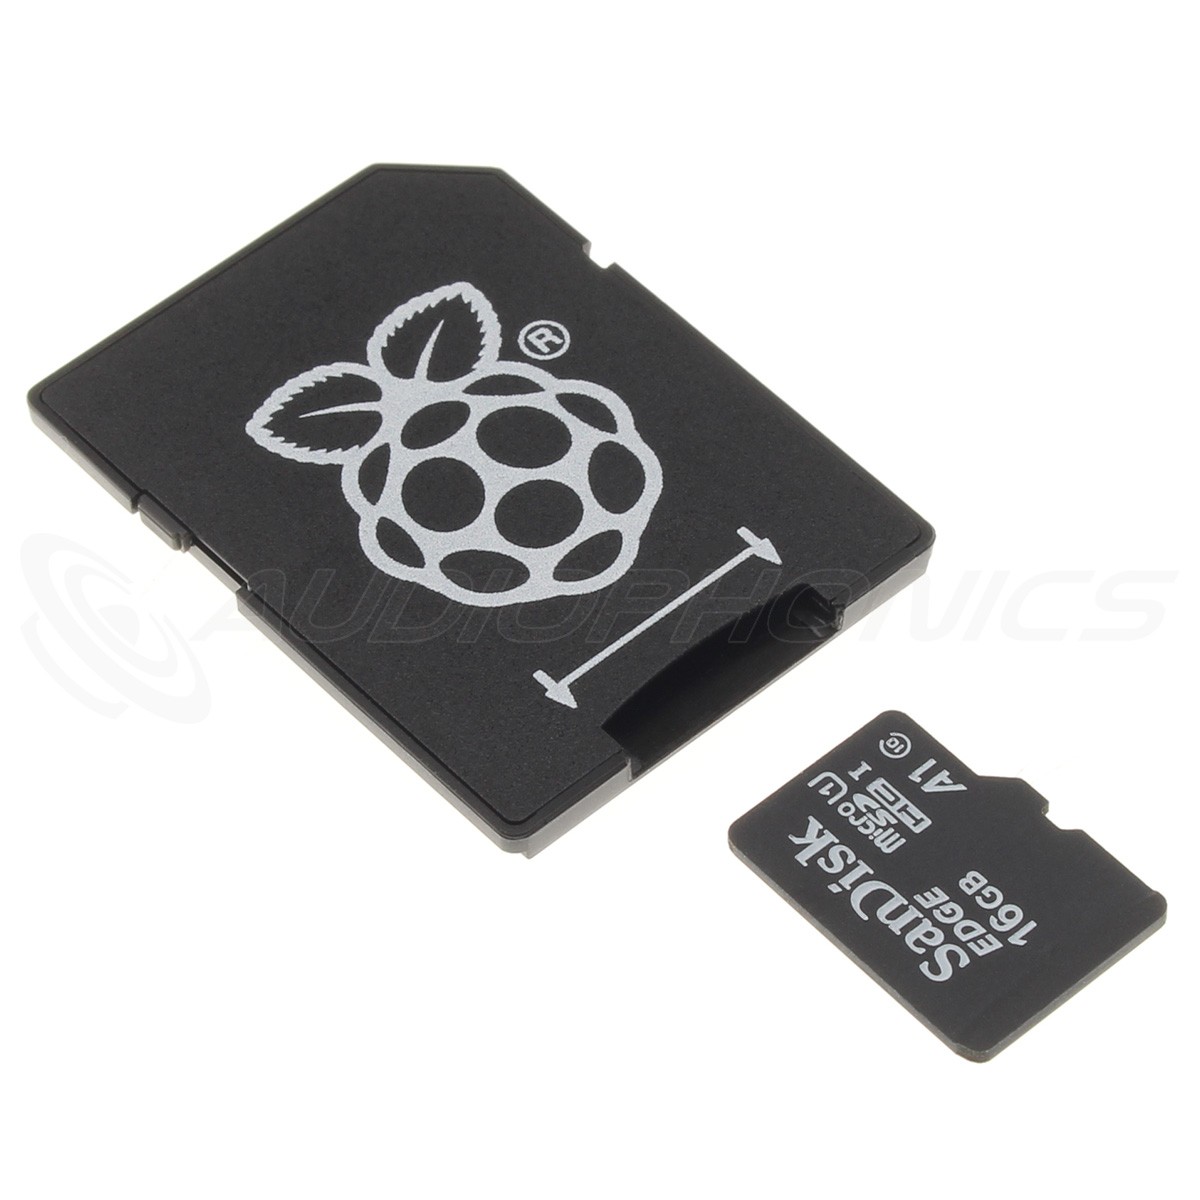 16GB Card with NOOBS 3.1 for Raspberry Pi Computers including 4